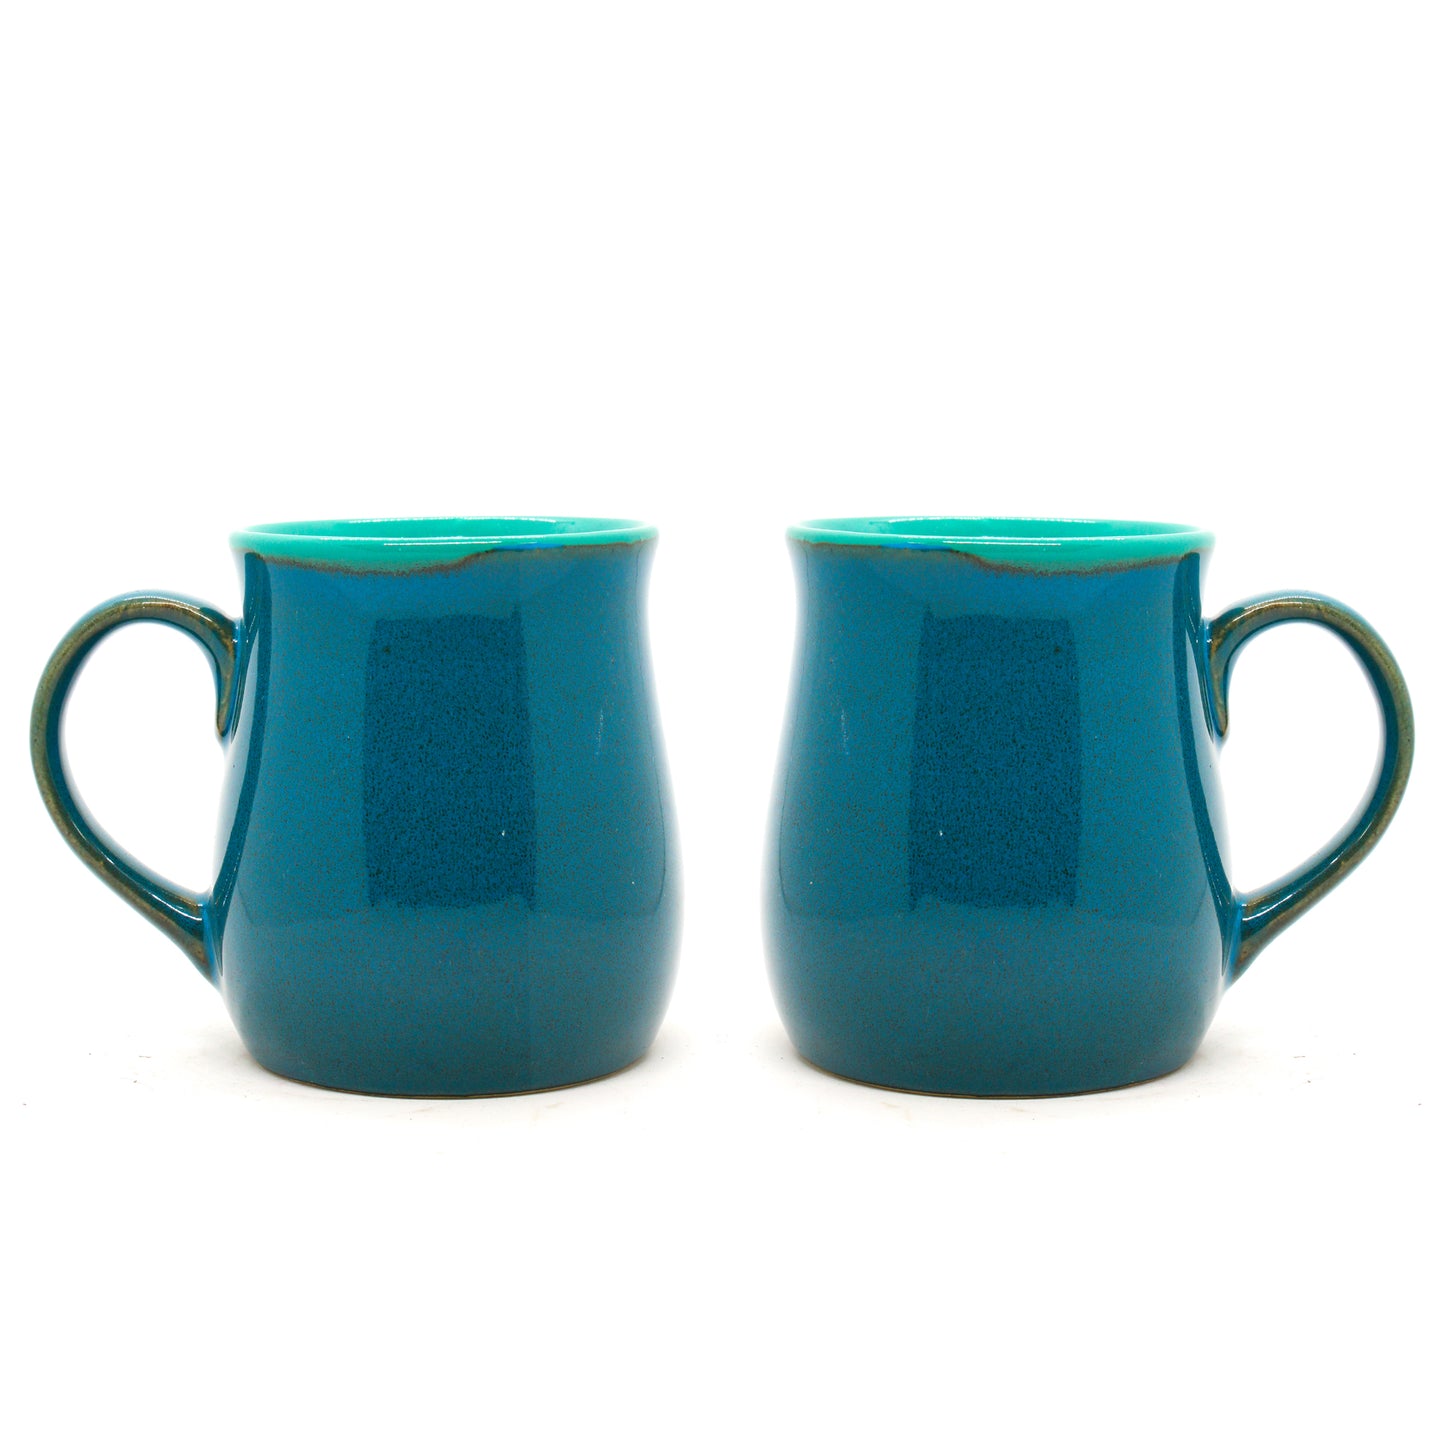 'Curves Are In Vogue' Ceramic Coffee Mug (Set of Two)